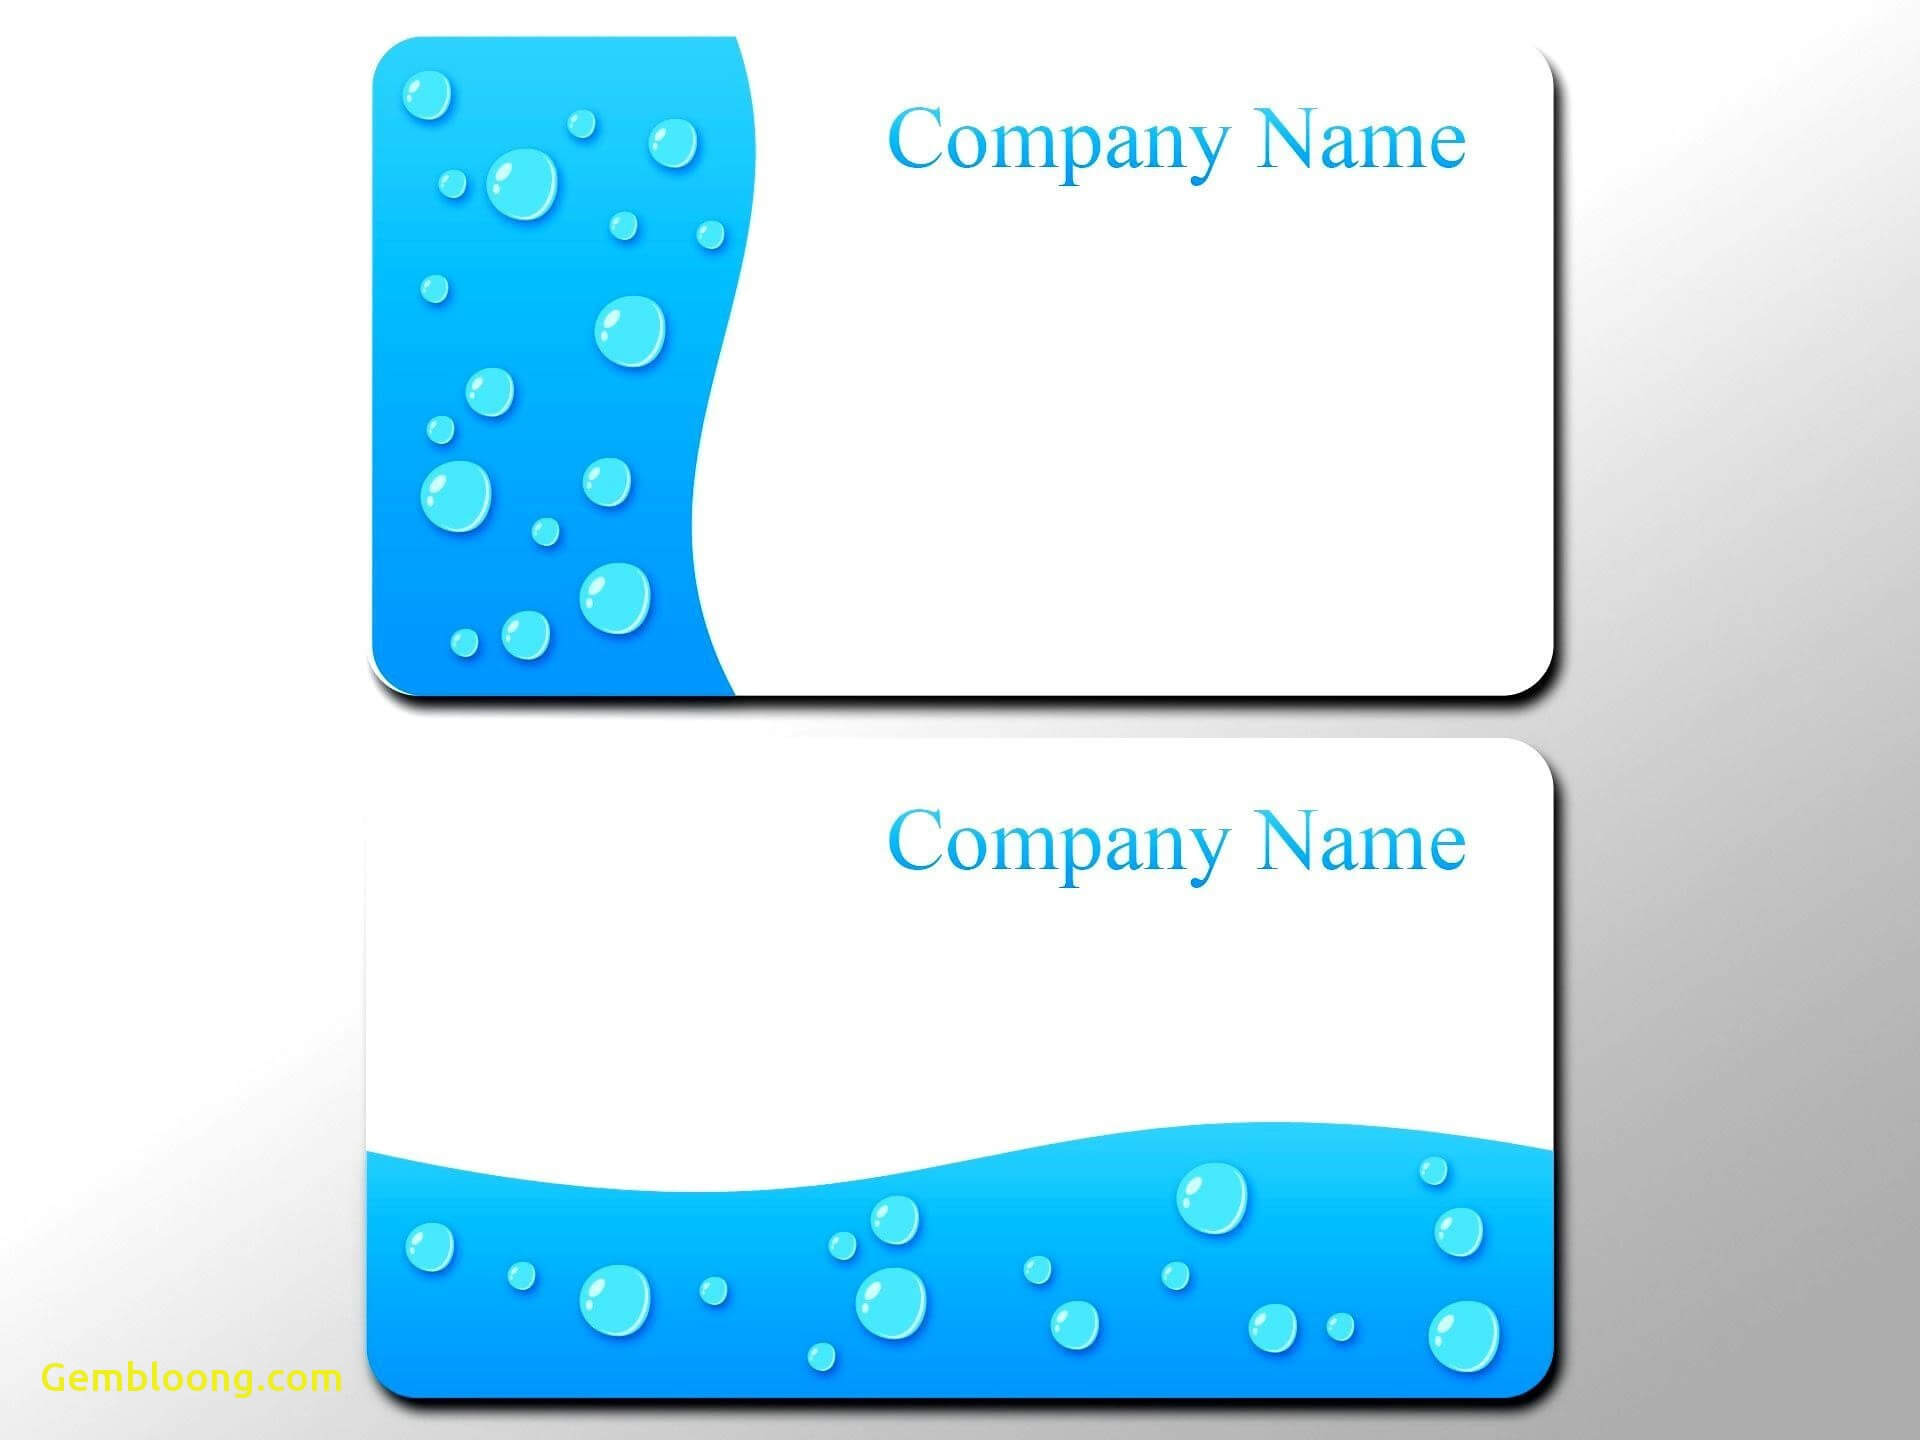 Business Card Photoshop Template Psd Awesome 016 Business In Plain Business Card Template